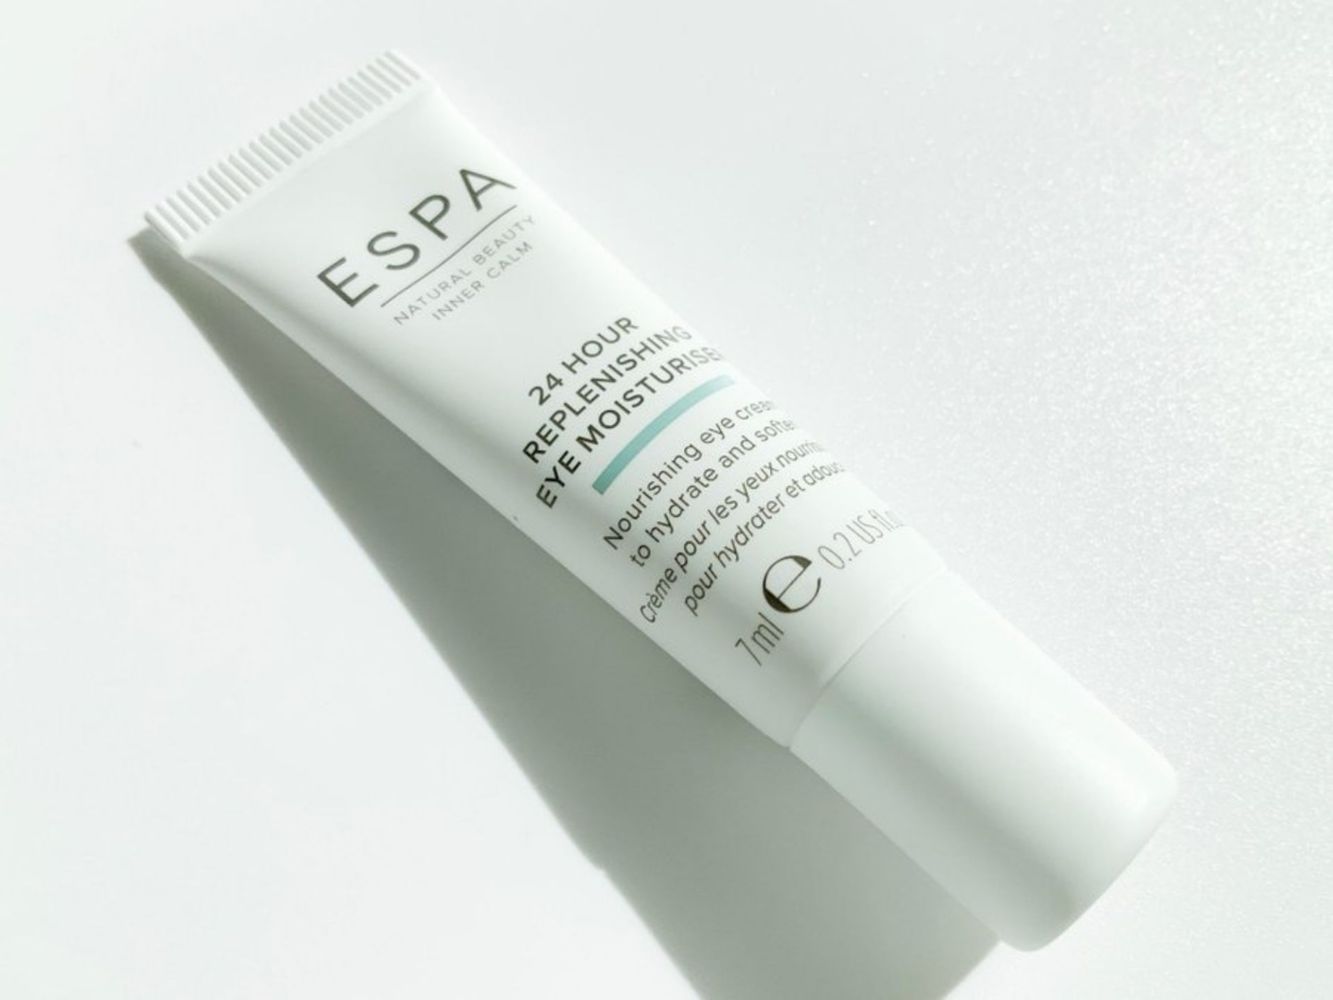 Liquidation Sale of Luxury High End Branded Skincare & Toiletries Products from Espa - Delivery Available